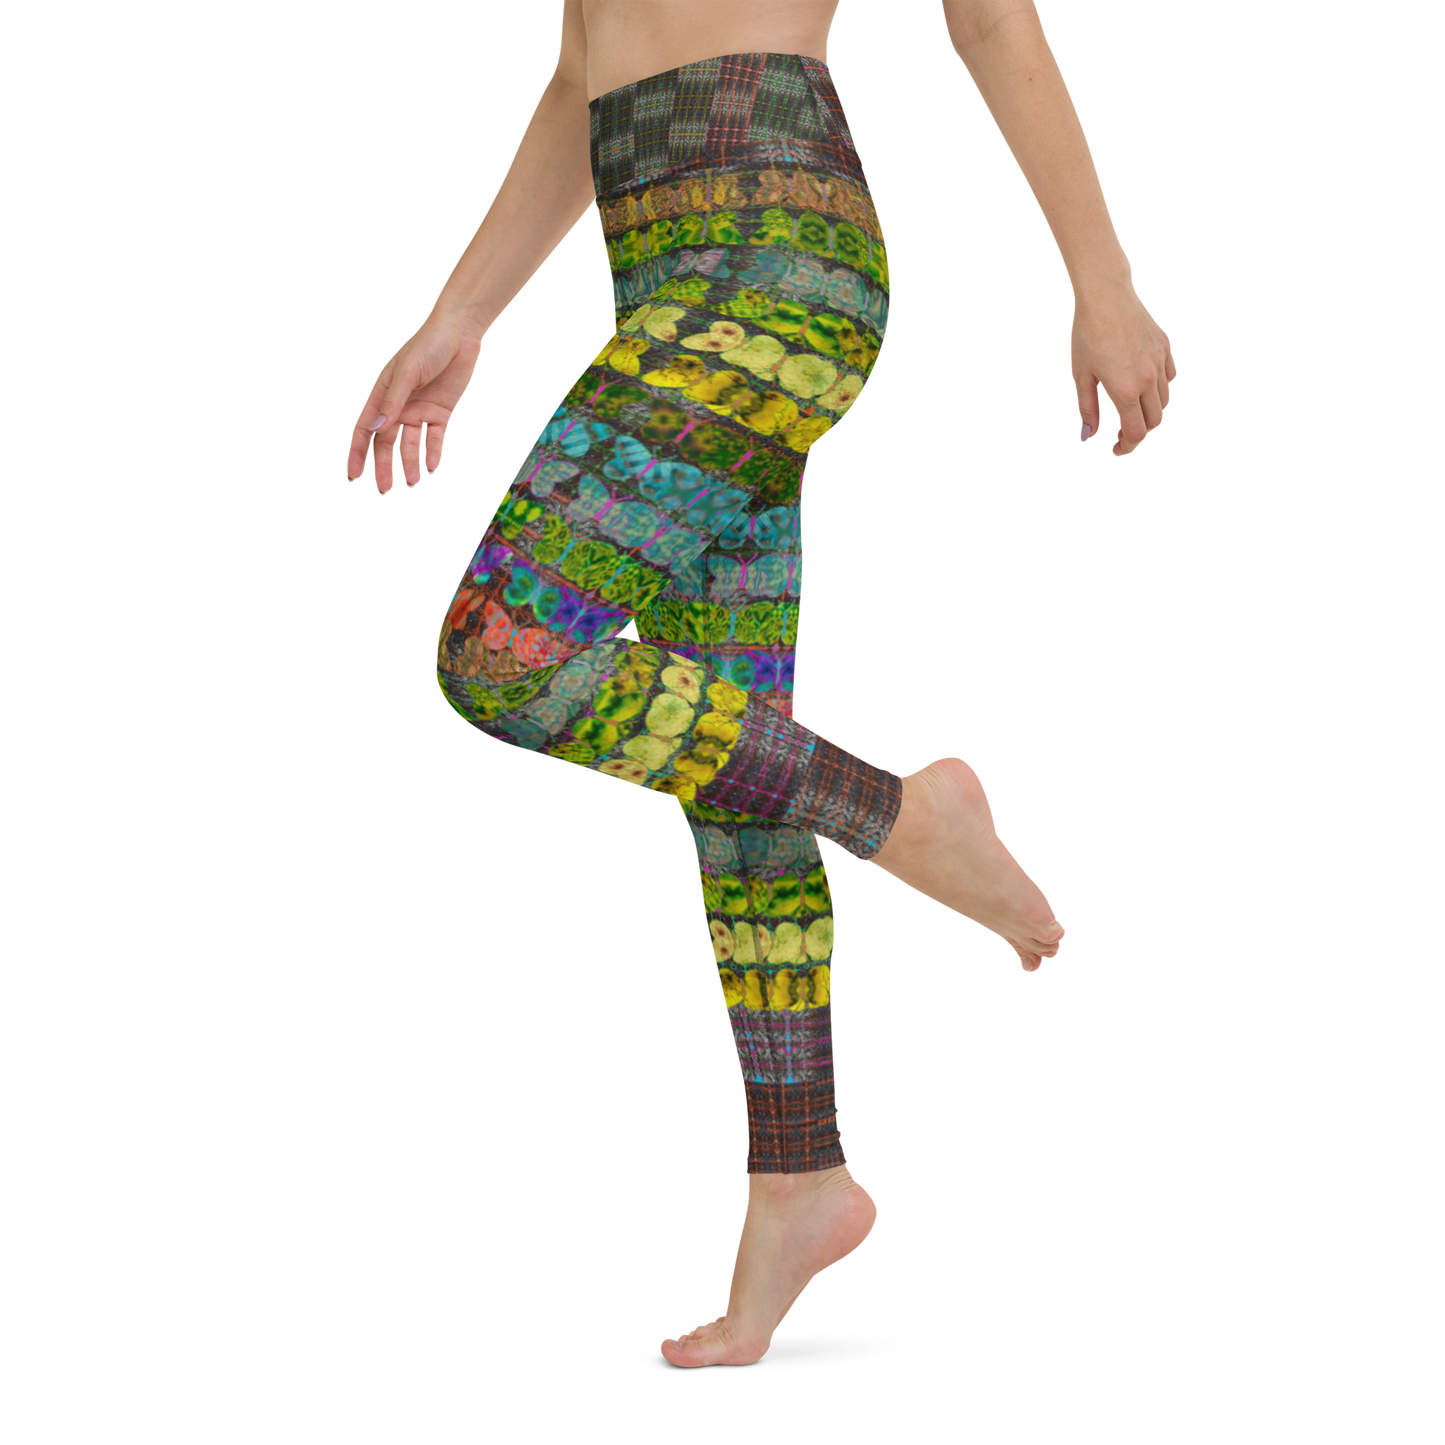 Yoga Leggings (Her/They)(Butterfly Glade Tree Link Pride Stripes) RJSTHs2022 RJS